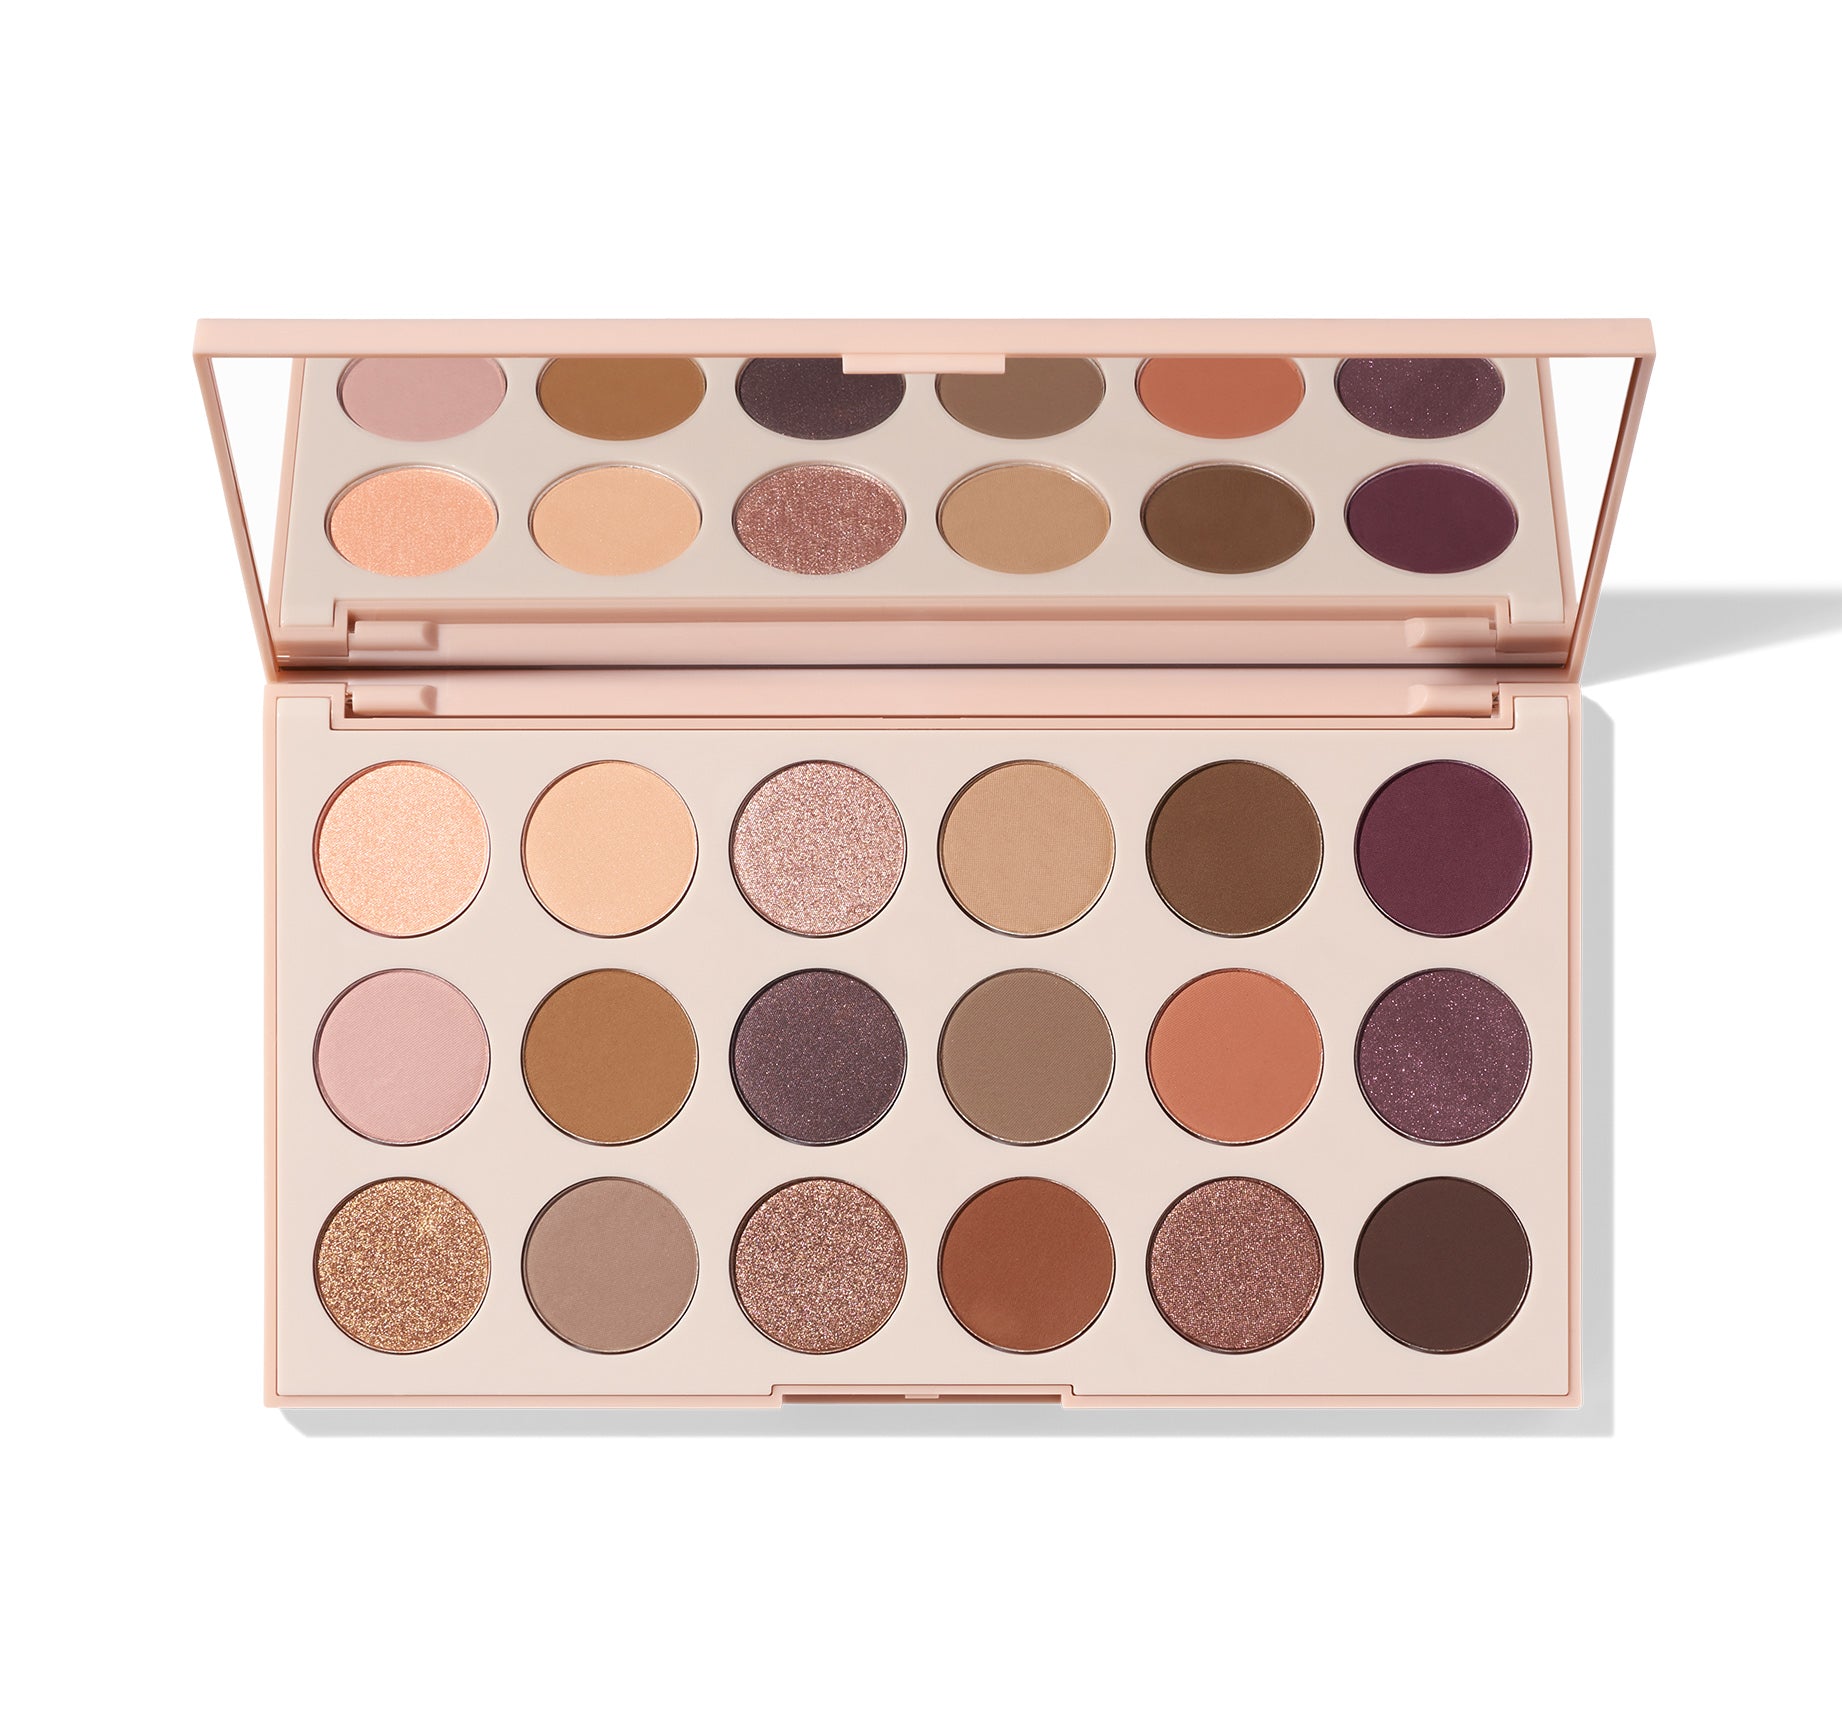 Make Up For Ever Let's Gold 18-Pan Eyeshadow Palette Review & Swatches